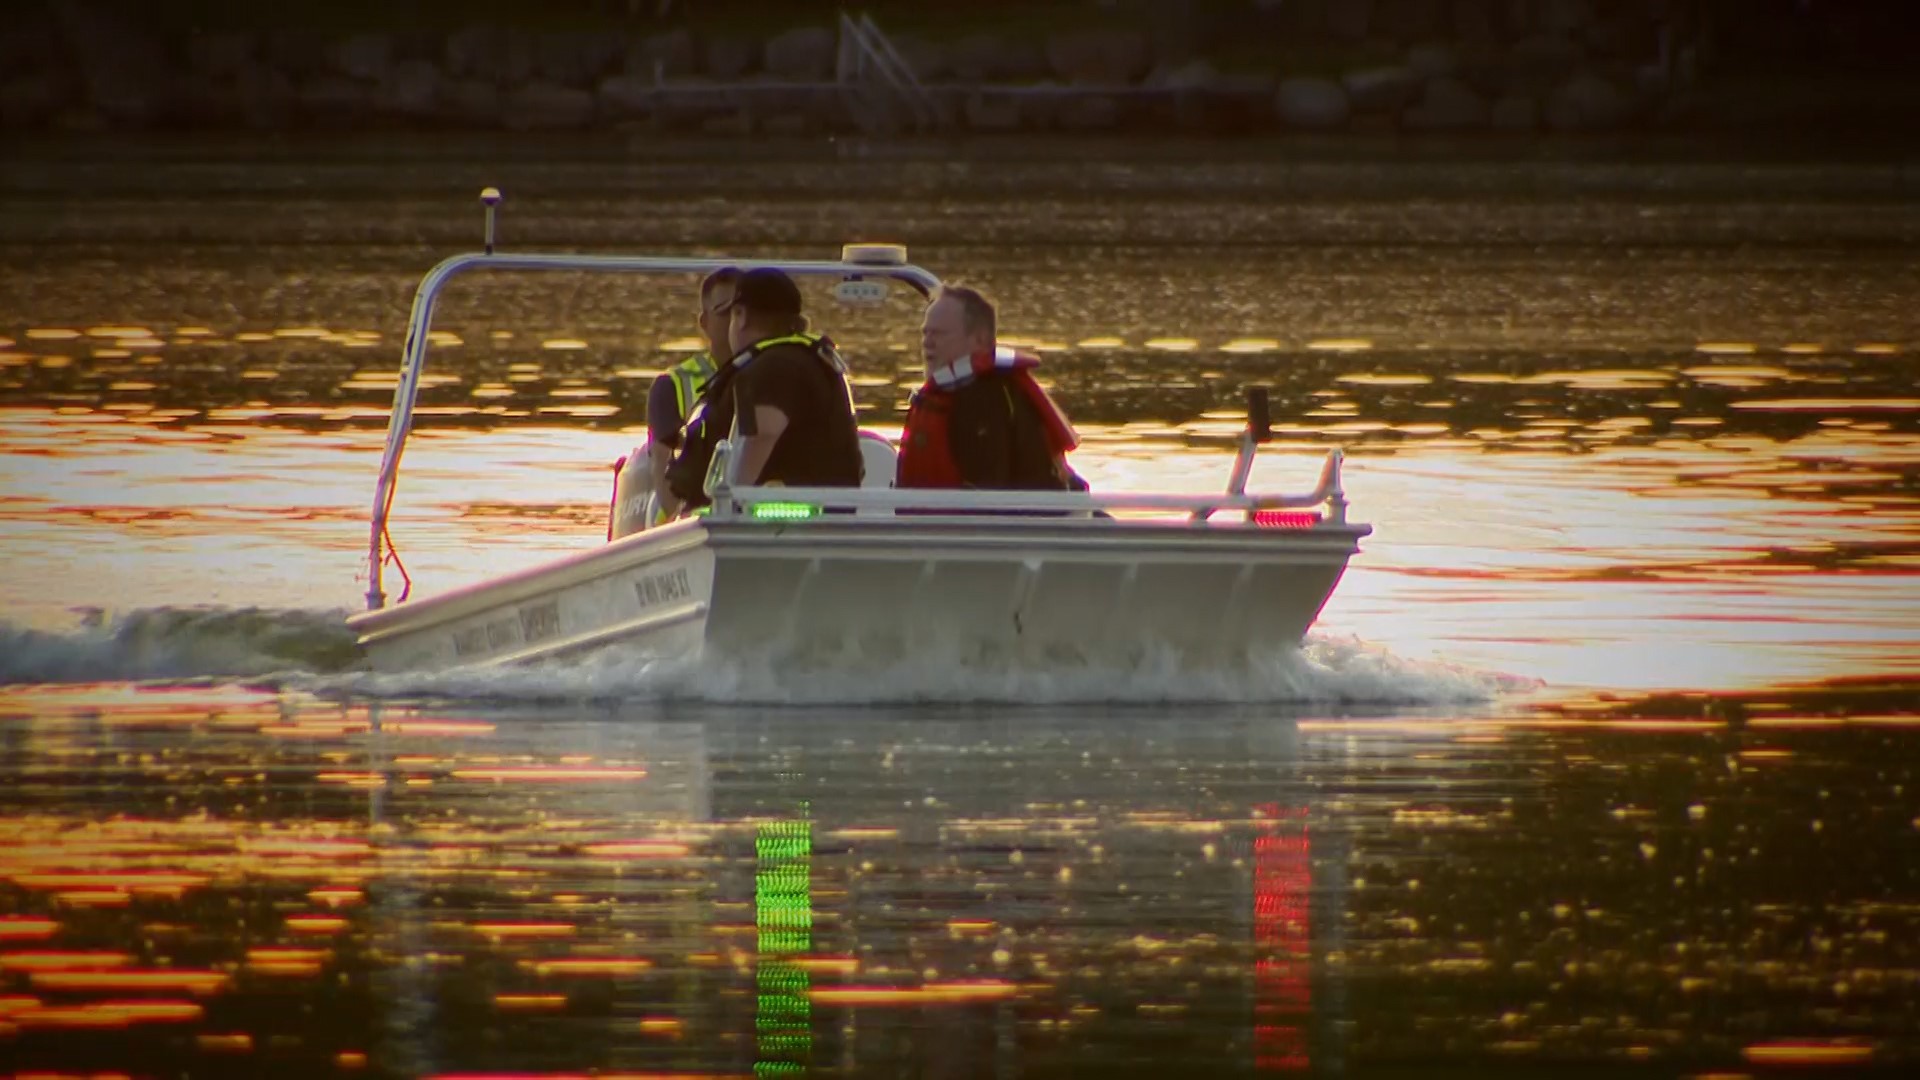 Summer has arrived and Minnesotans are back doing some of their favorite activities like boating, fishing and swimming.